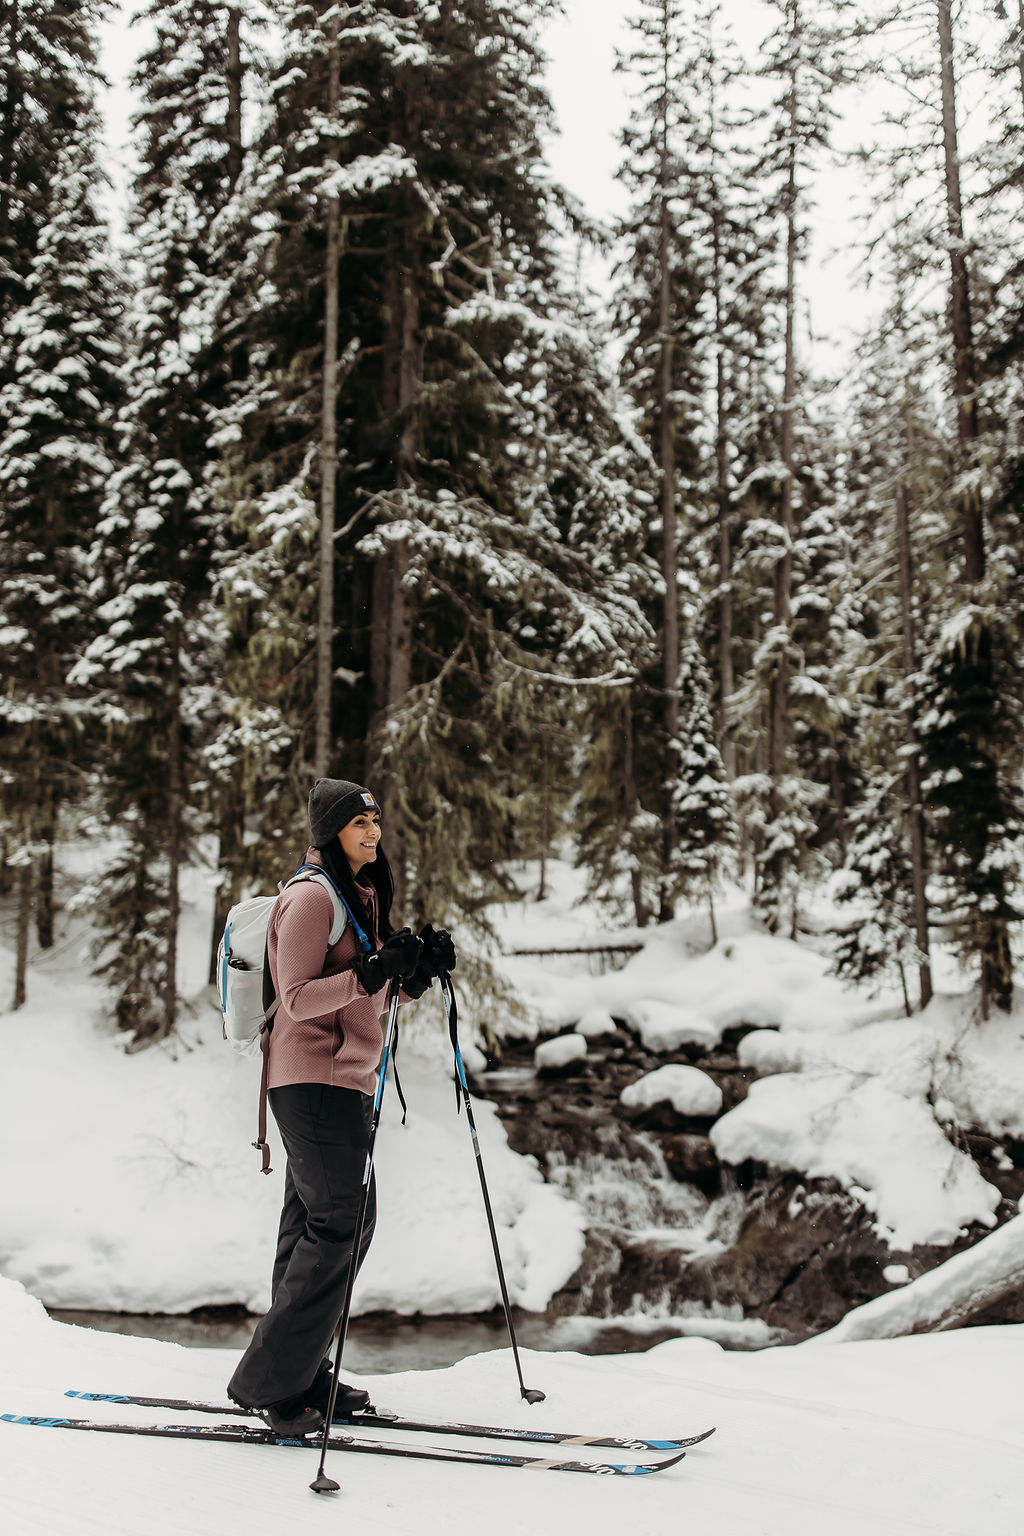 Brogan montana elopement photographer cross-country skiing in a snowy forest with a creek in the background.